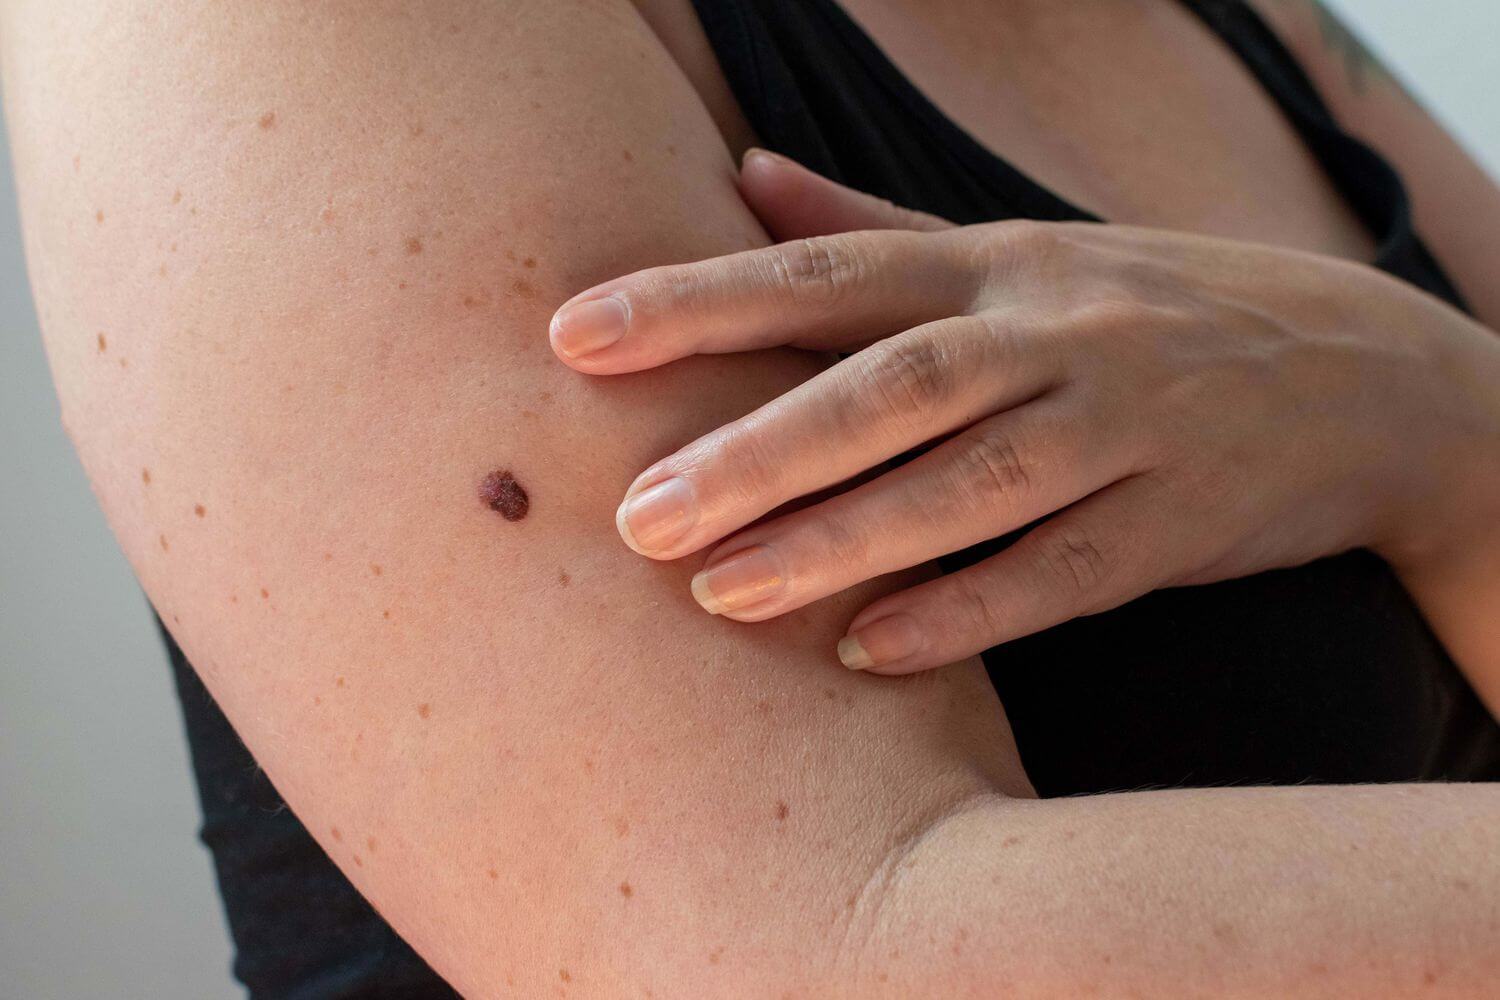 Doctors says, new growth, size and colour of moles may be skin cancer